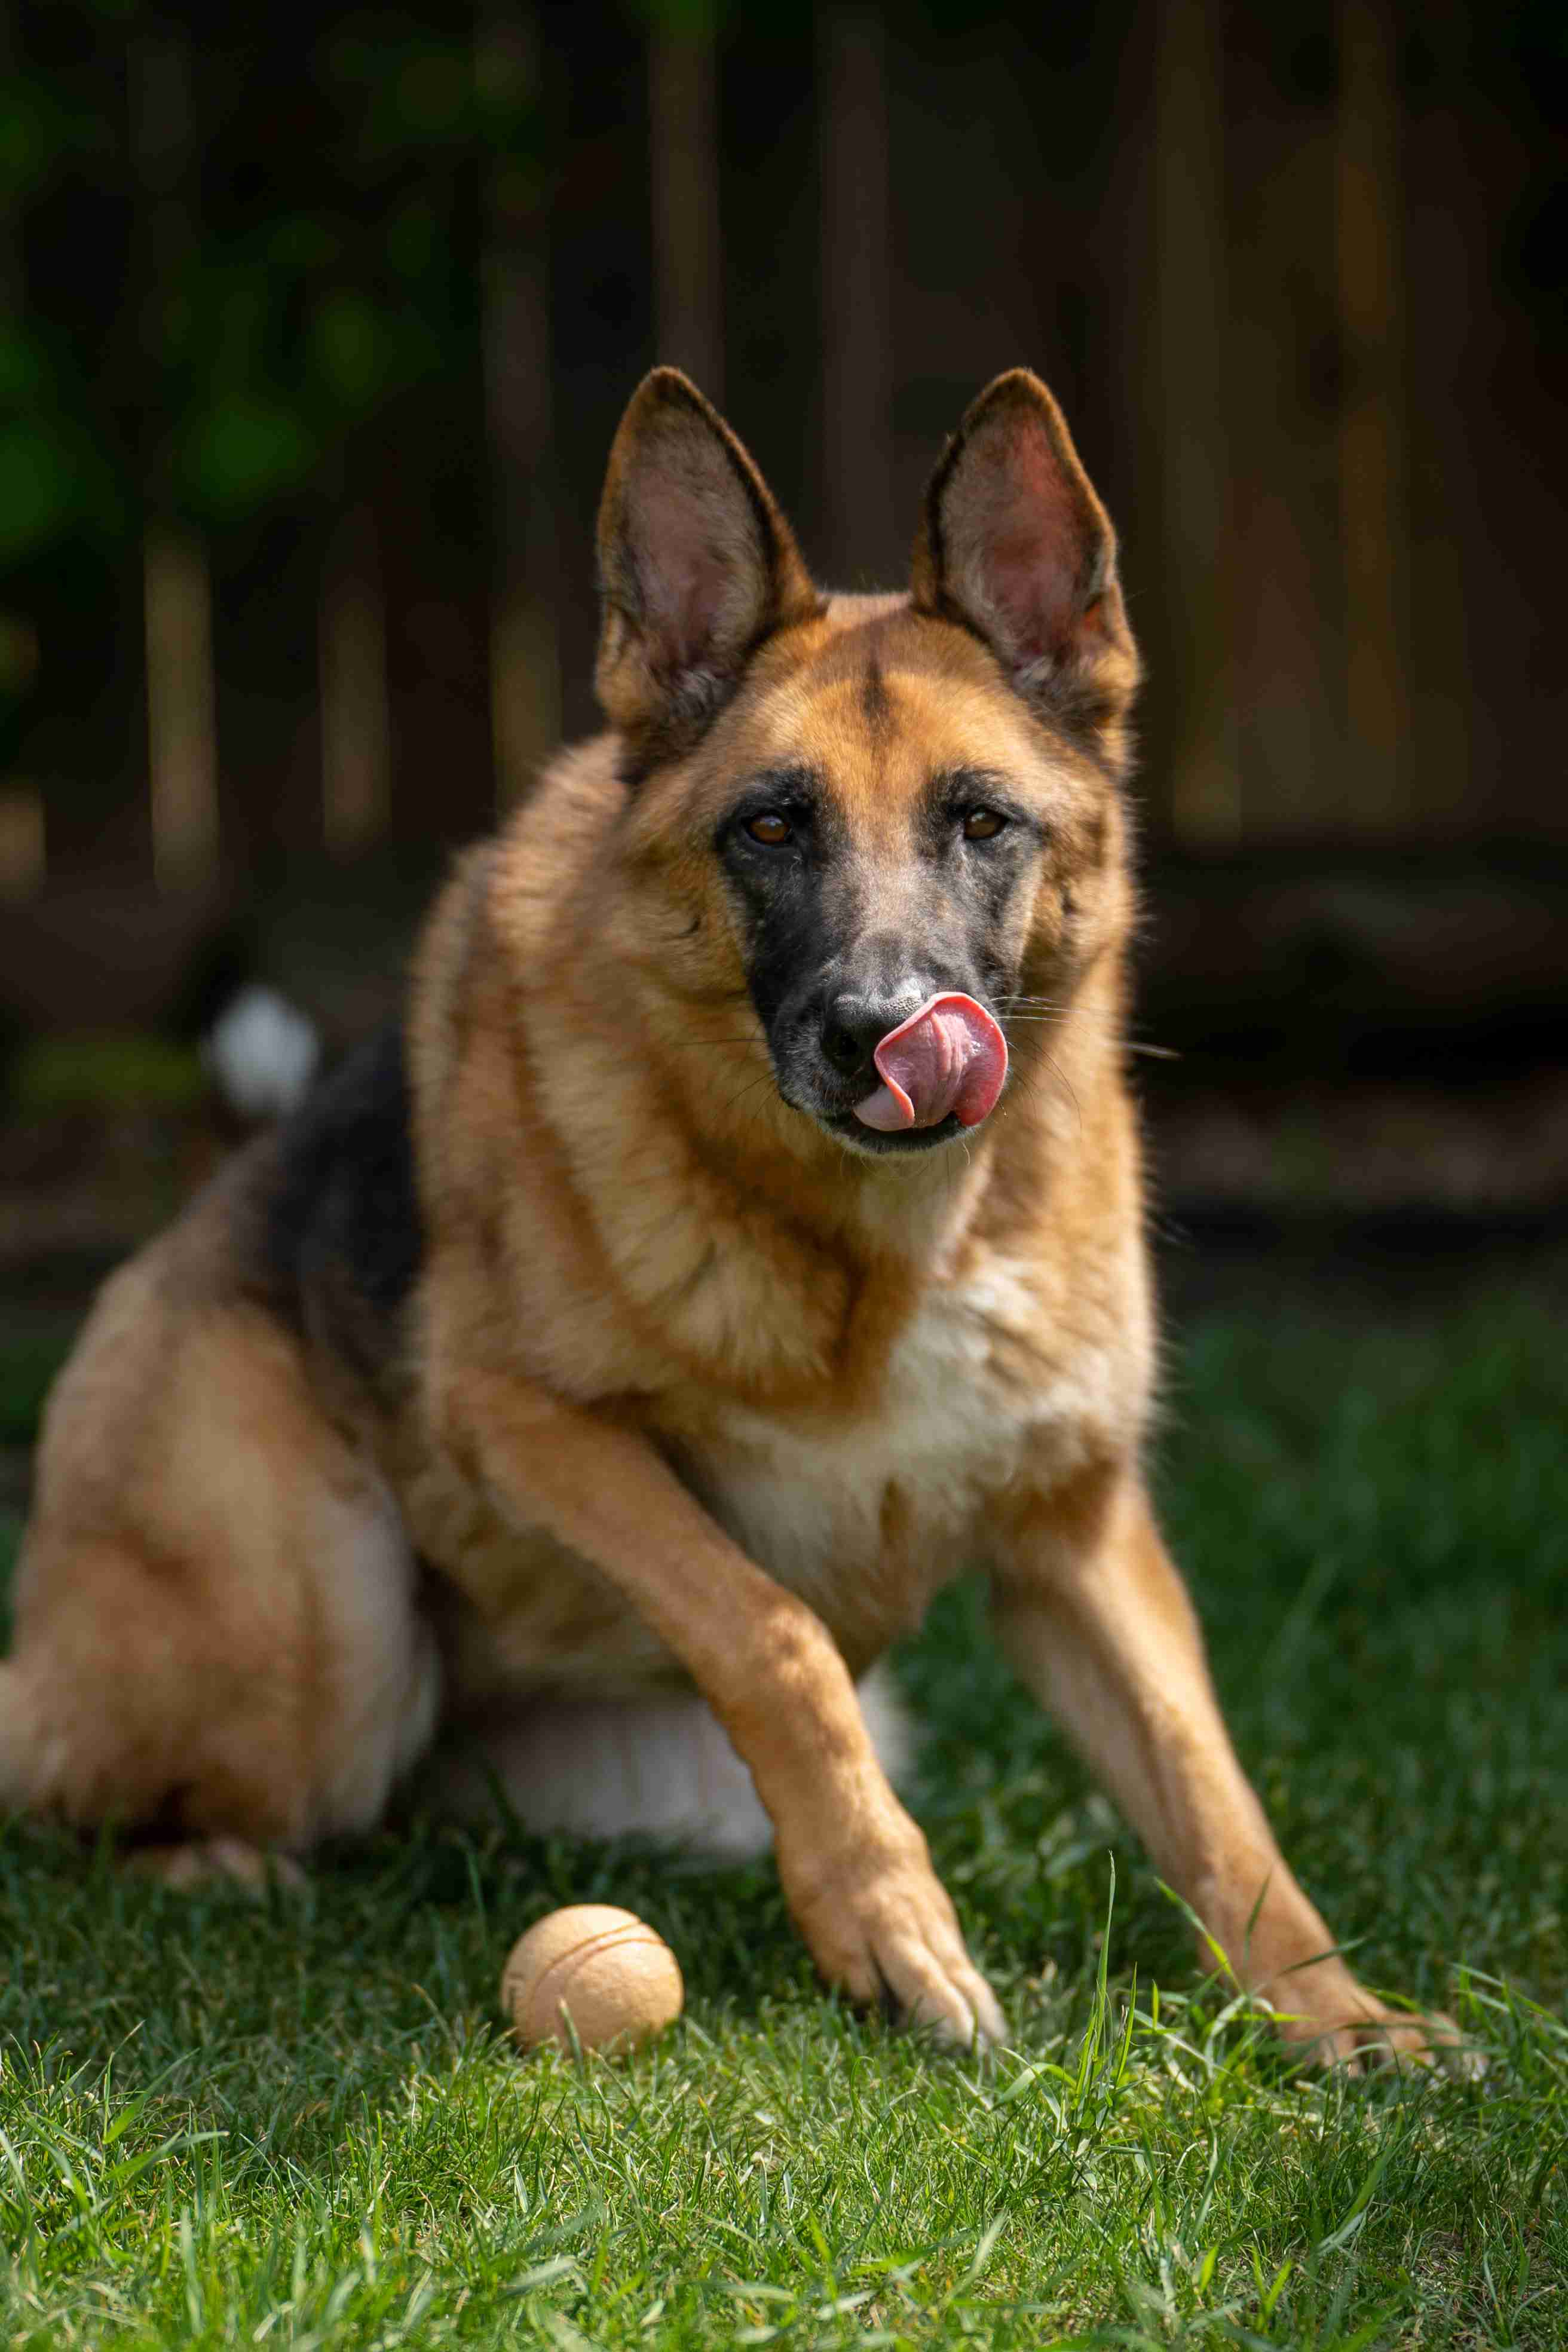 What kind of treats are best for a German shepherd?